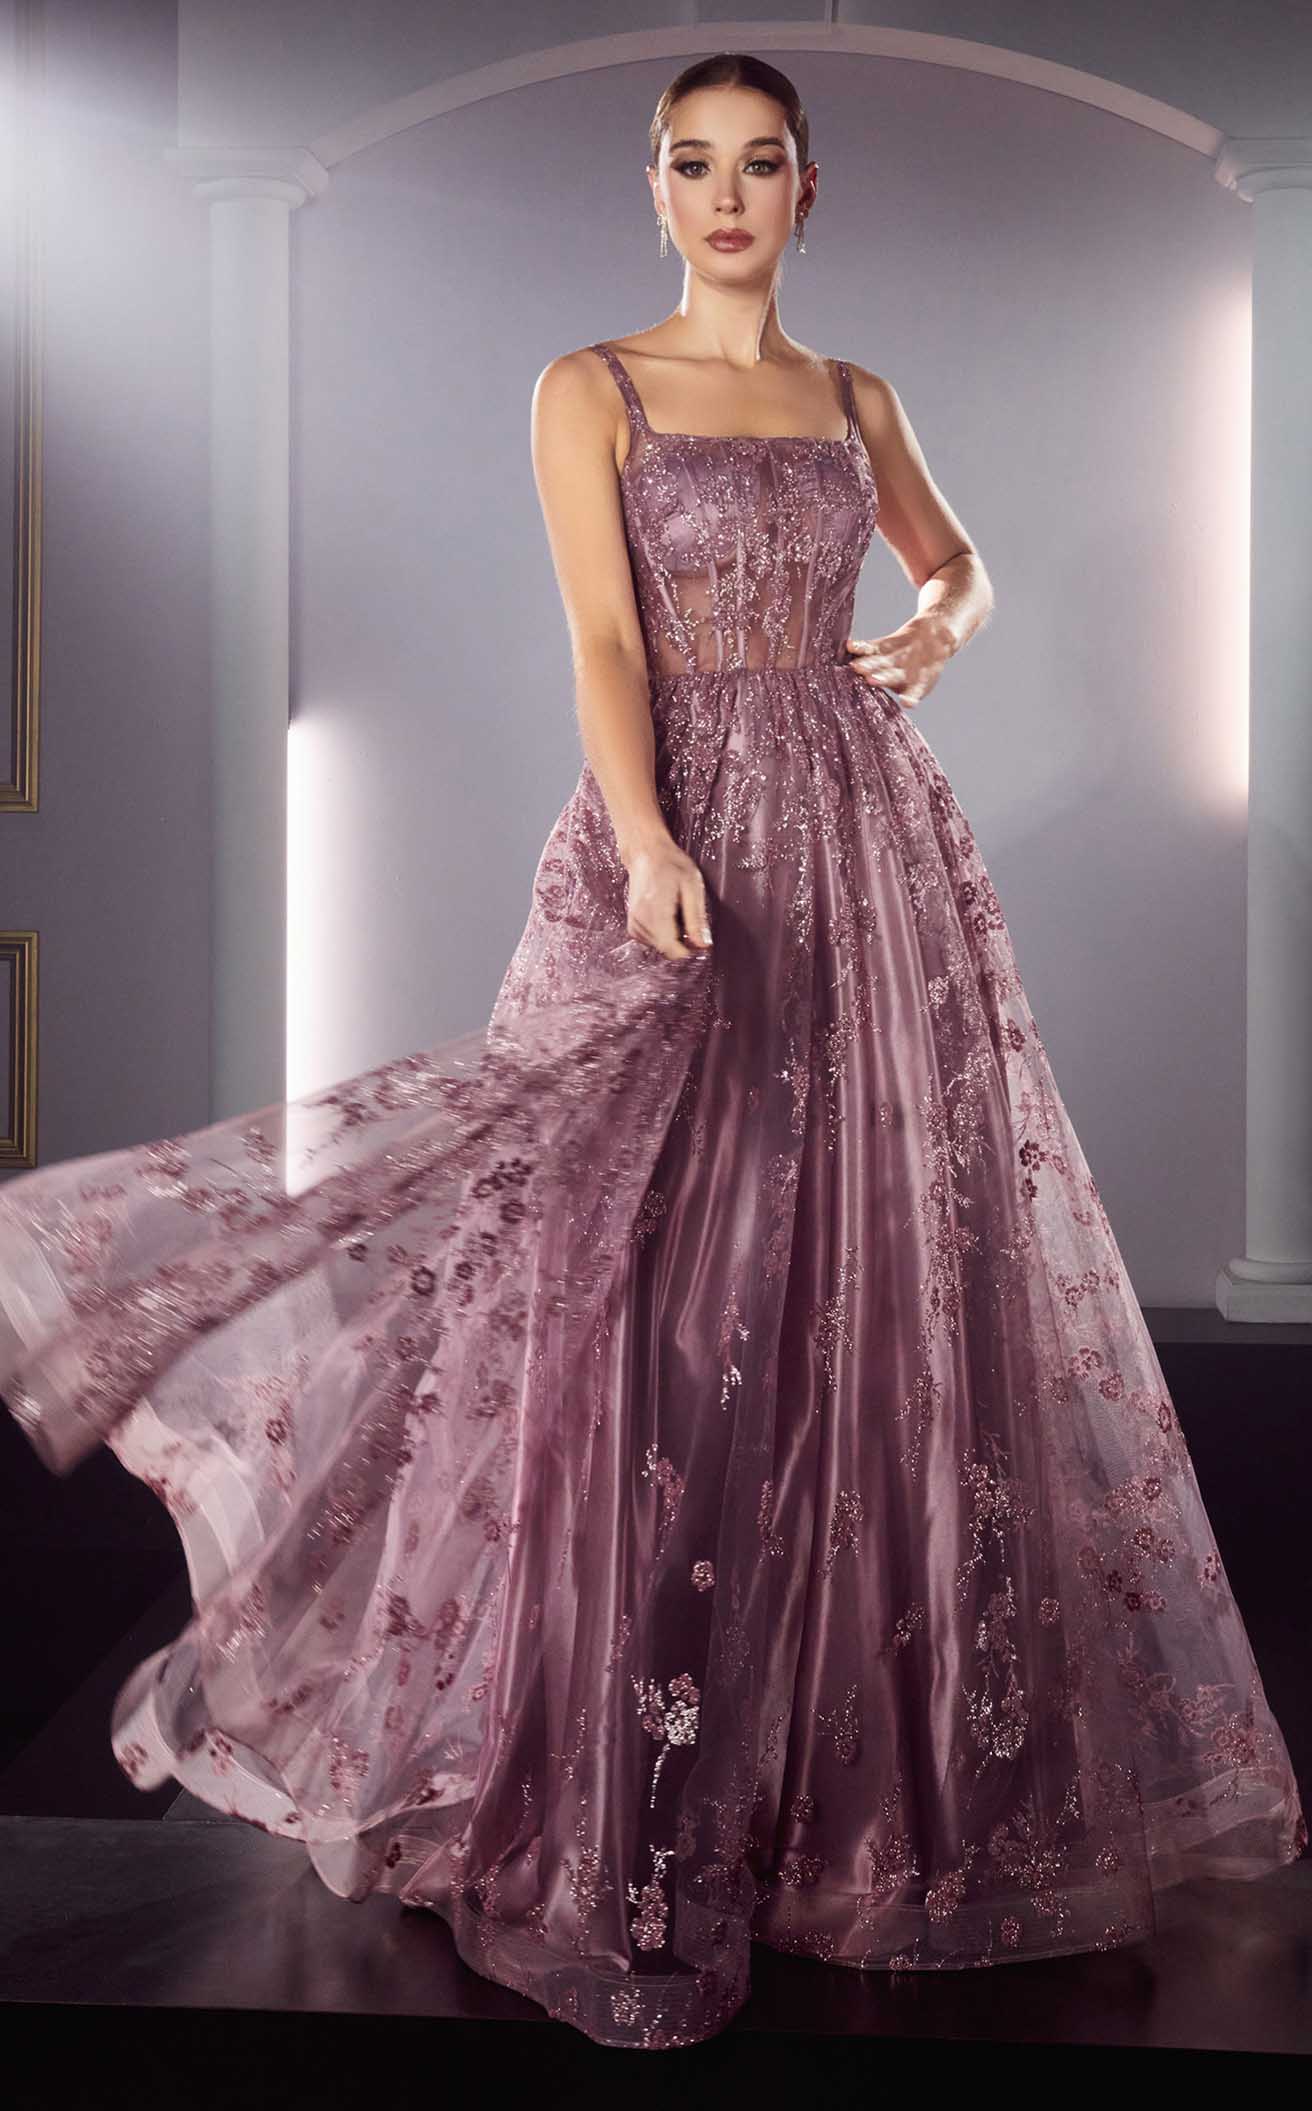 Beautiful Floor Length Evening Gown - Bags and purses